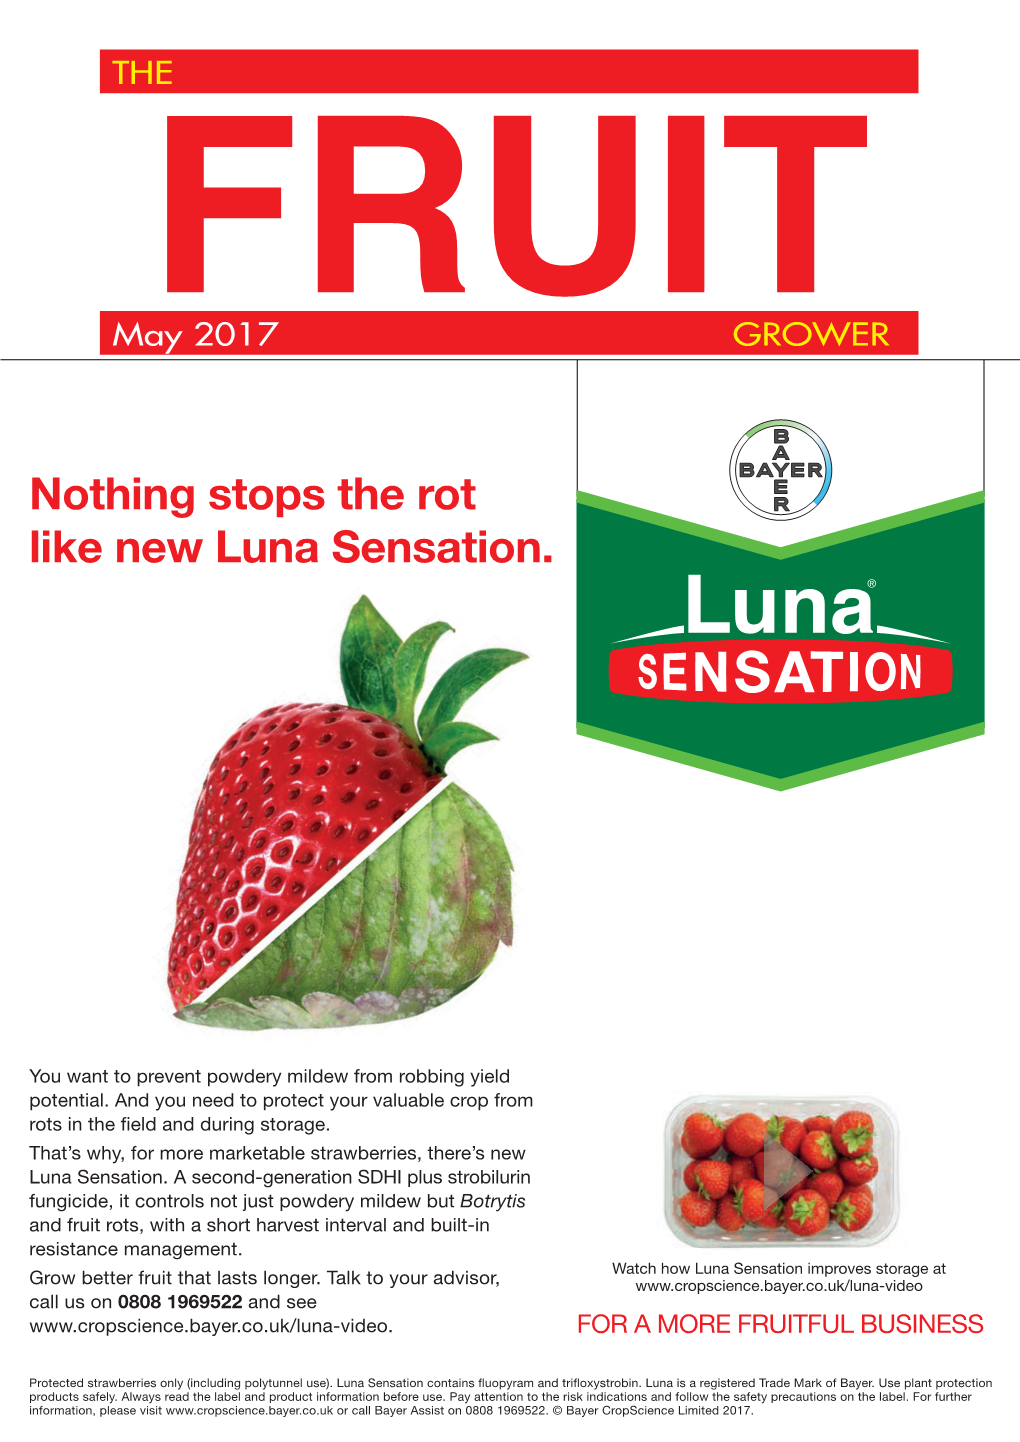 Nothing Stops the Rot Like New Luna Sensation